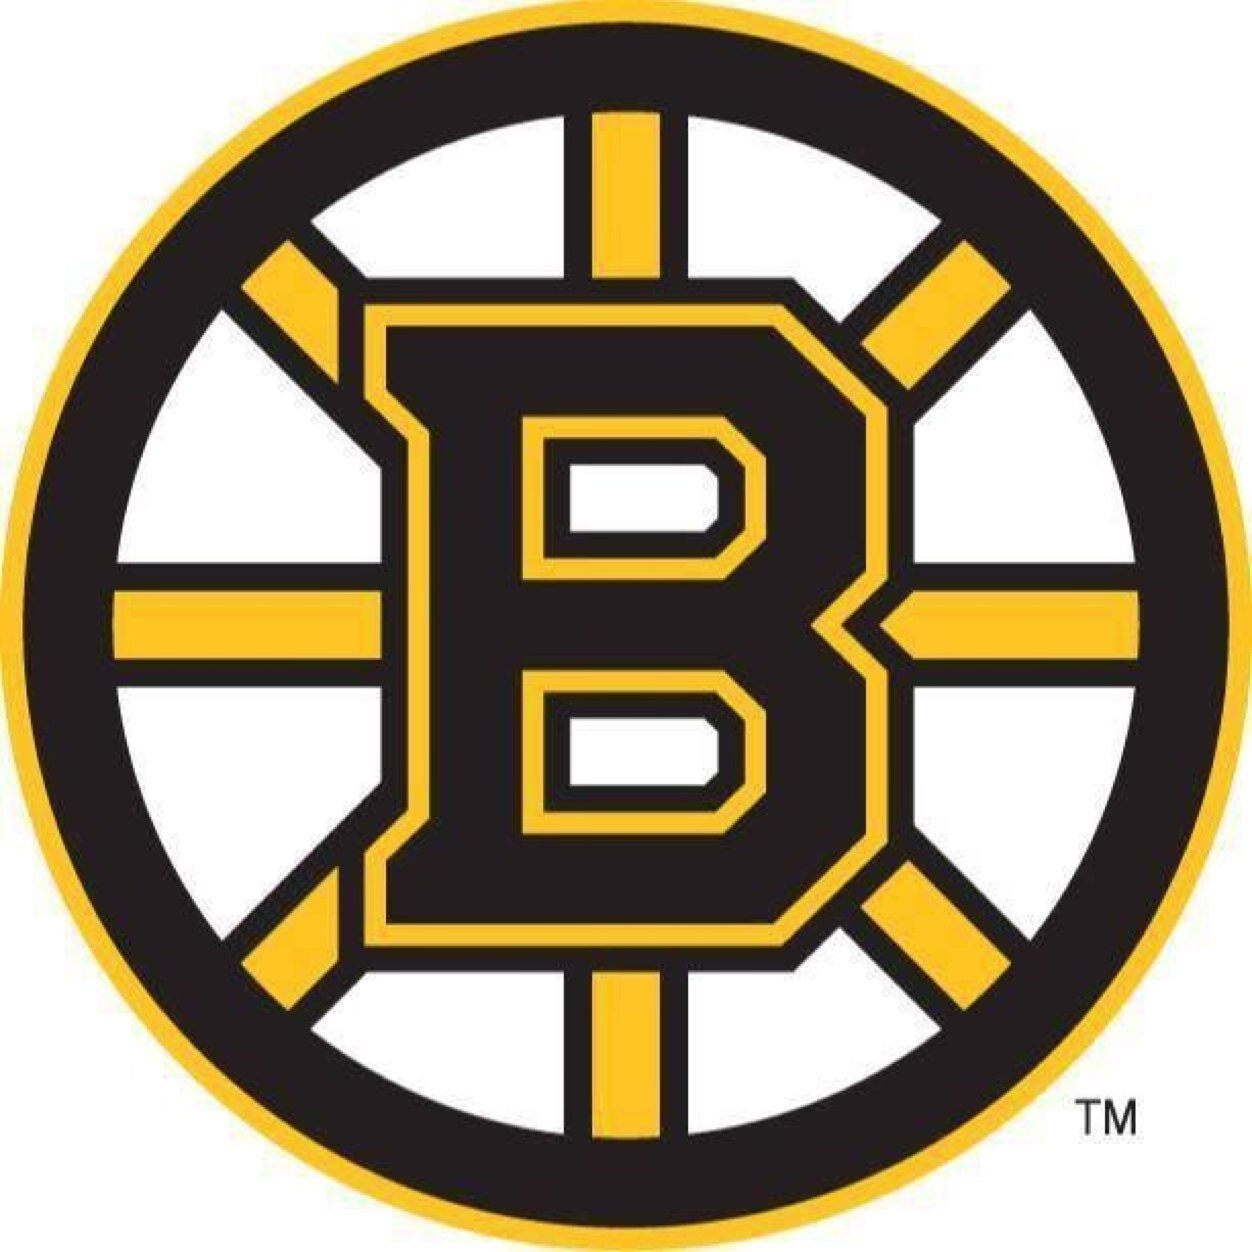 Welcome to the twitter home of BOSTON BRUINS NEWS & UPDATES! All updates are posted from facebook and come from @nhlbruins and other twitter pages.